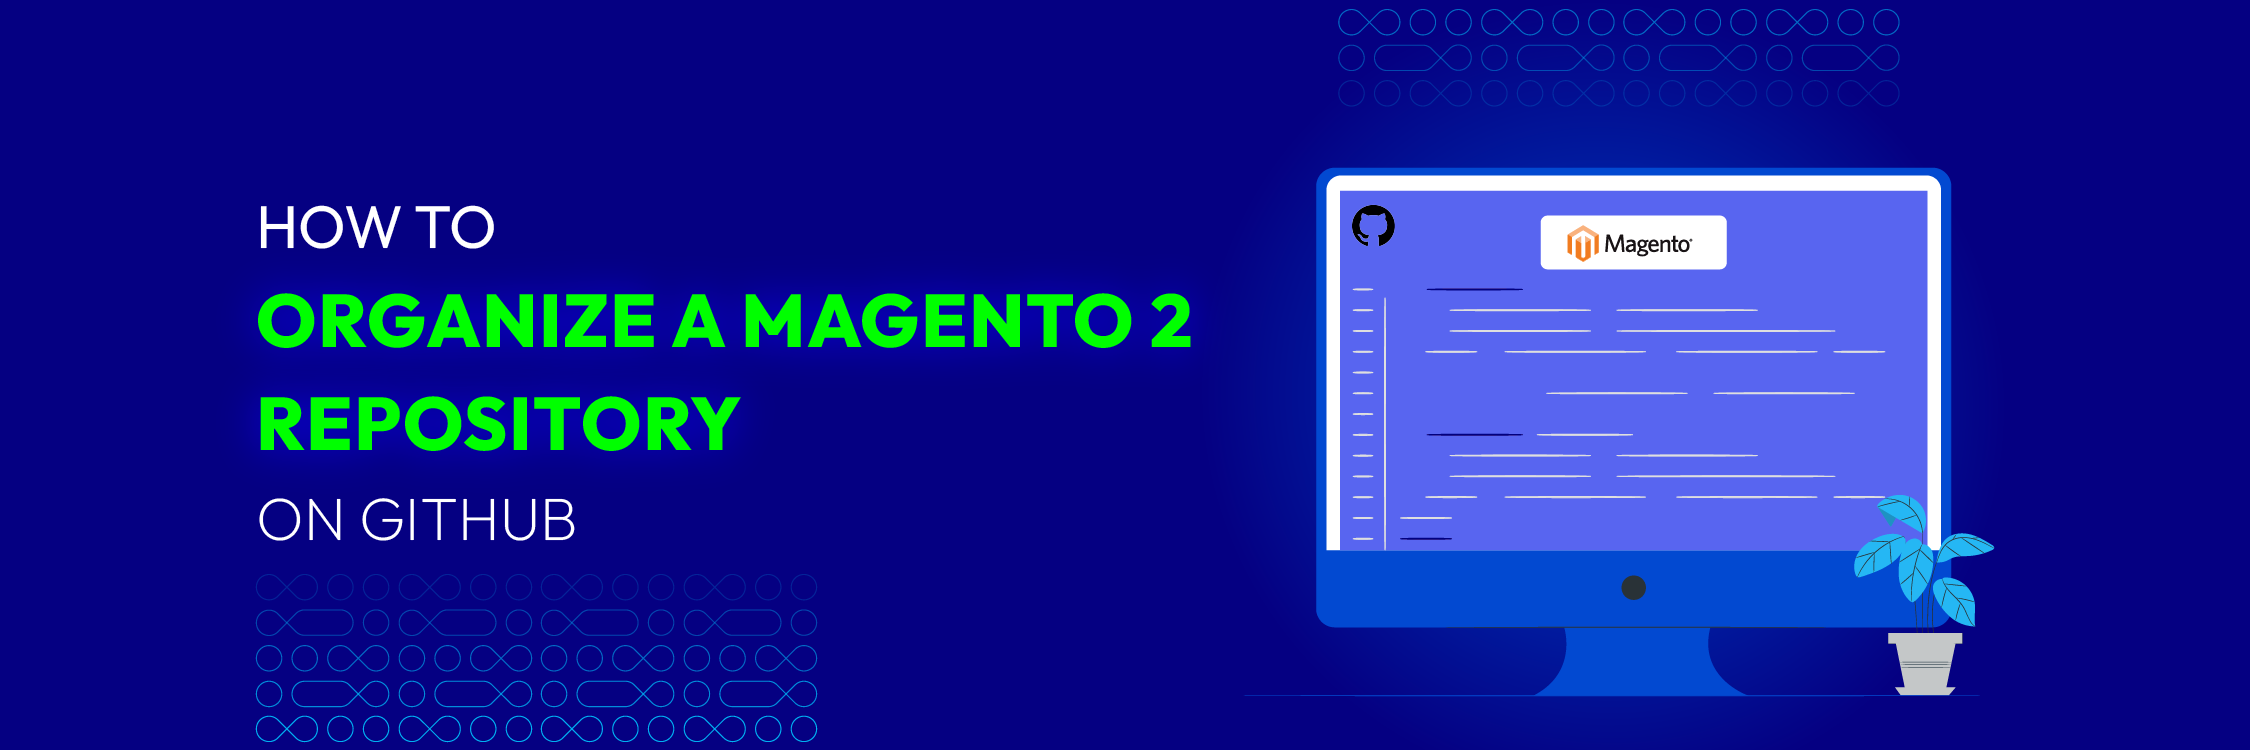 How to organize a Magento 2 repository on GitHub